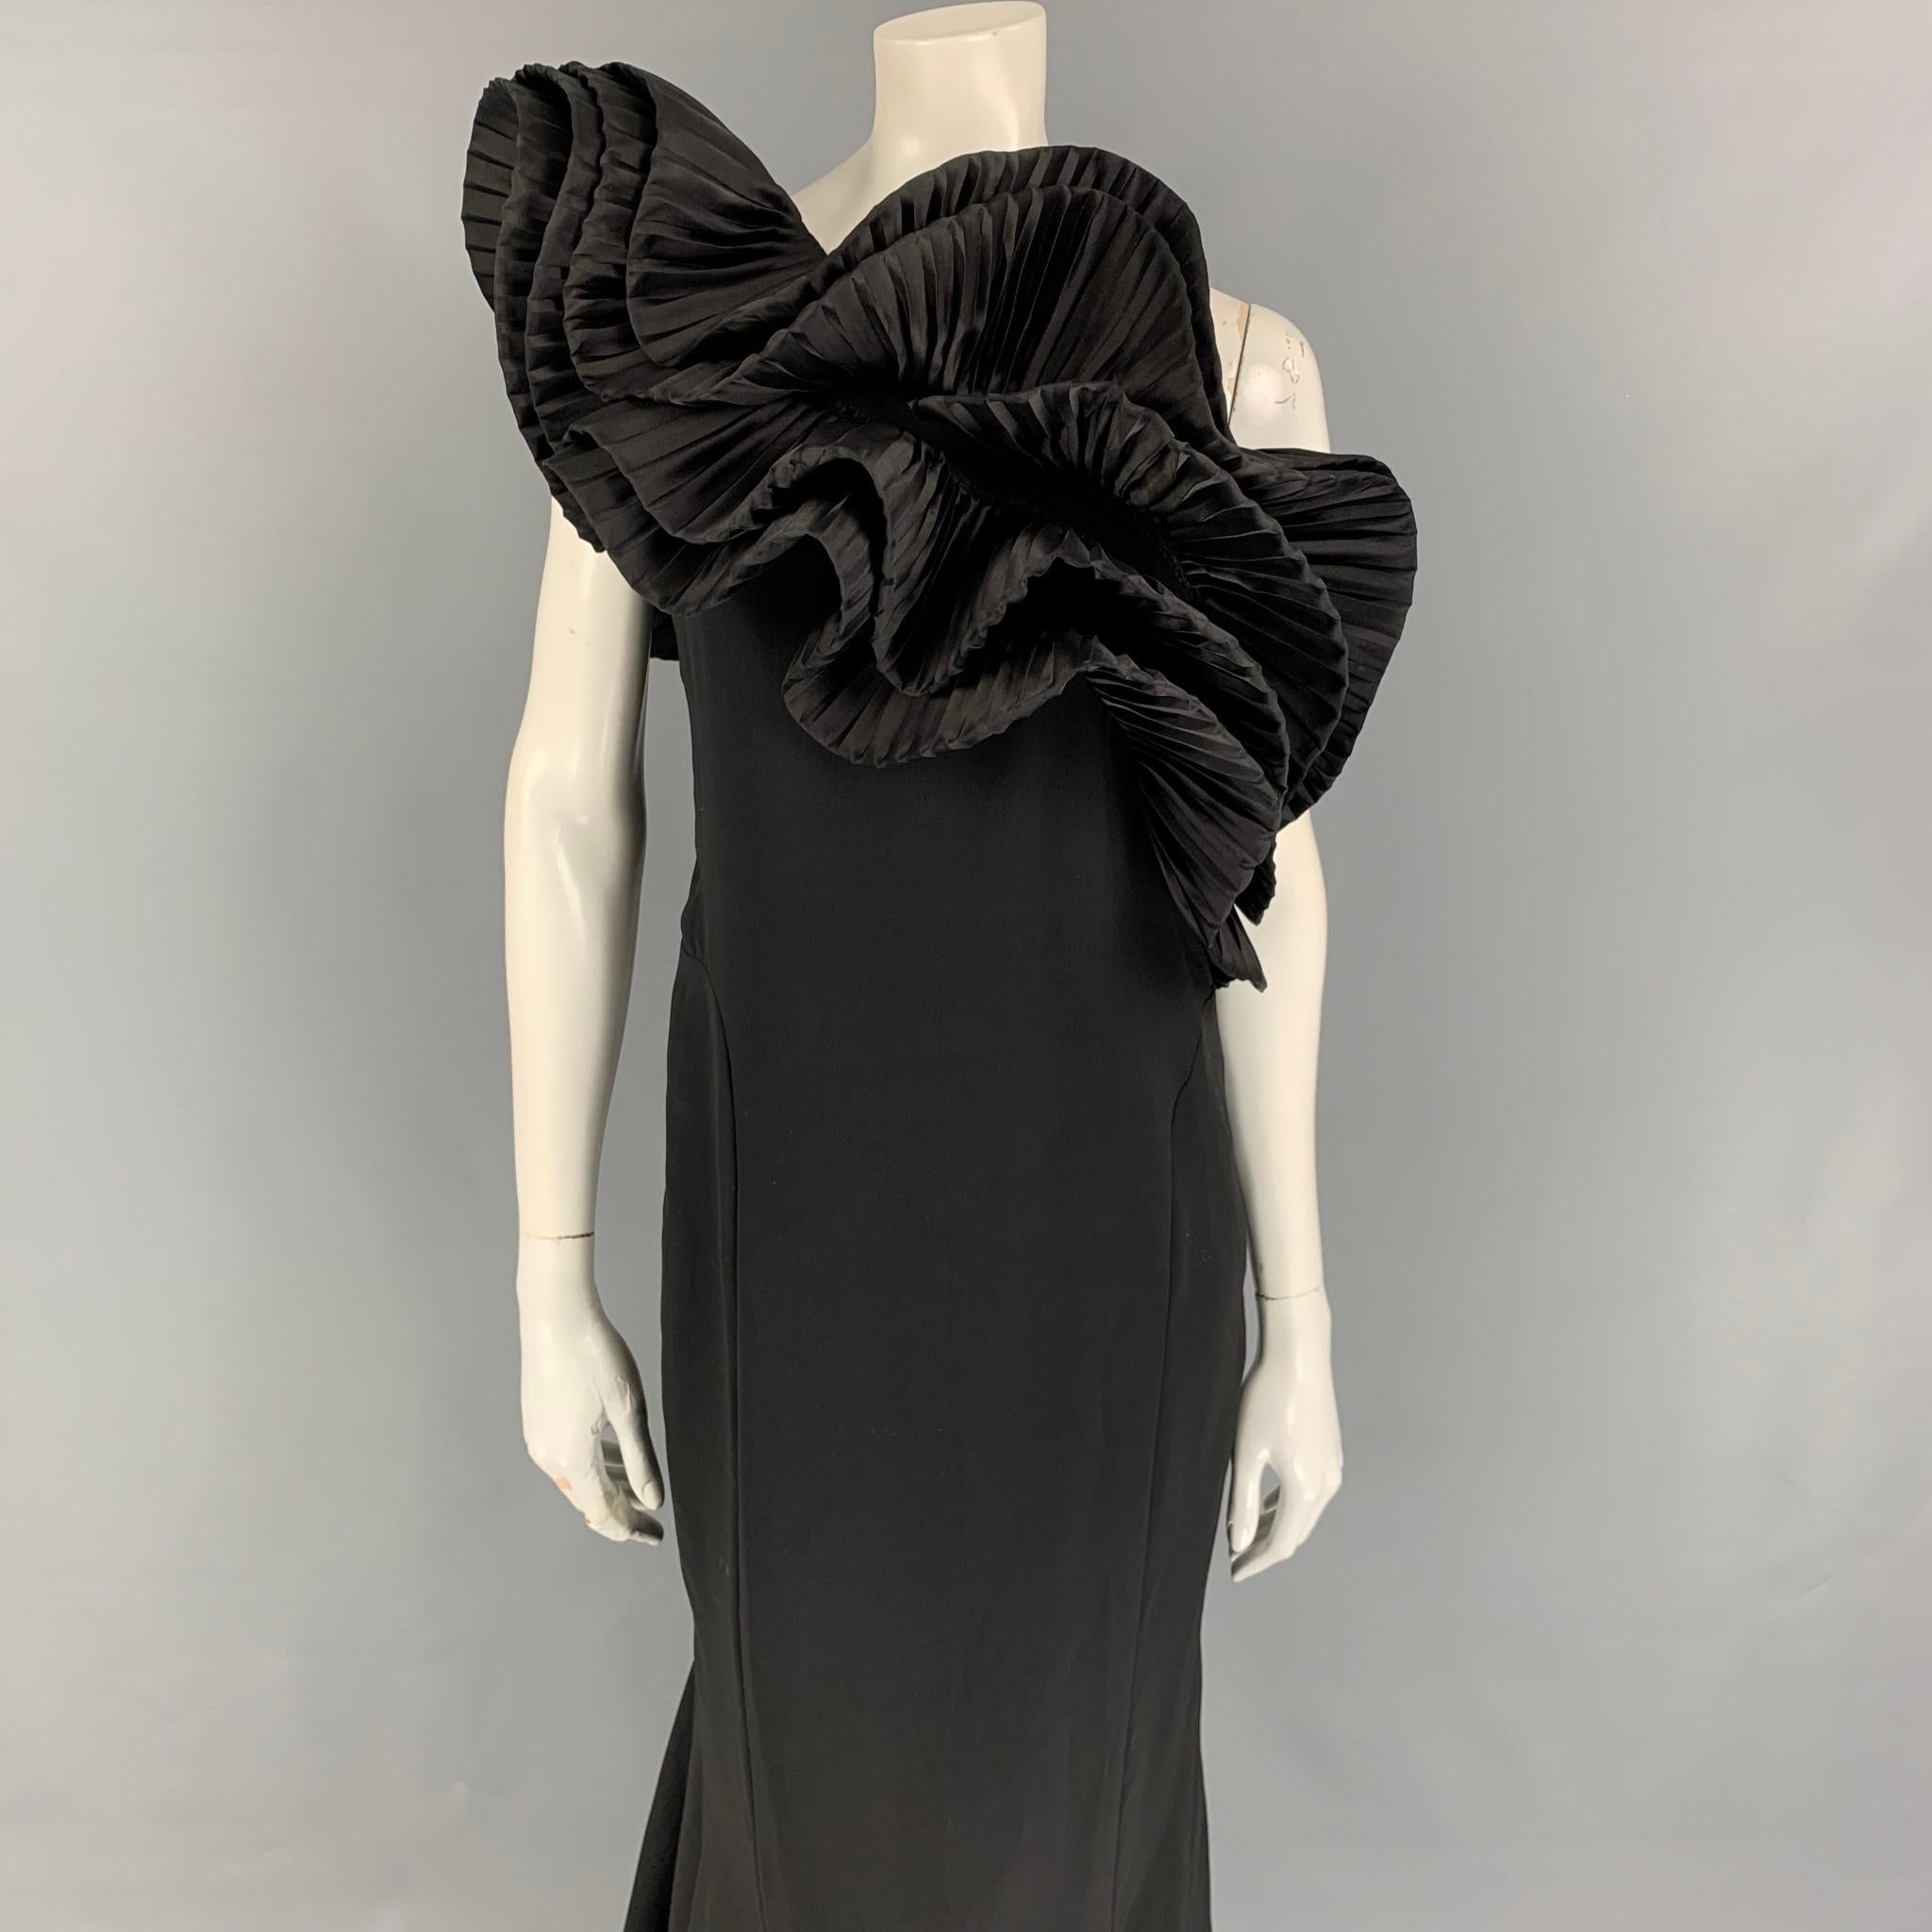 MARCHESA gown comes in a black wool with a slip liner featuring a one shoulder style, large ruffle design, sleeveless, snap button details, and a side zipper closure. 

Very Good Pre-Owned Condition. Fabric tag removed.
Marked: Size tag